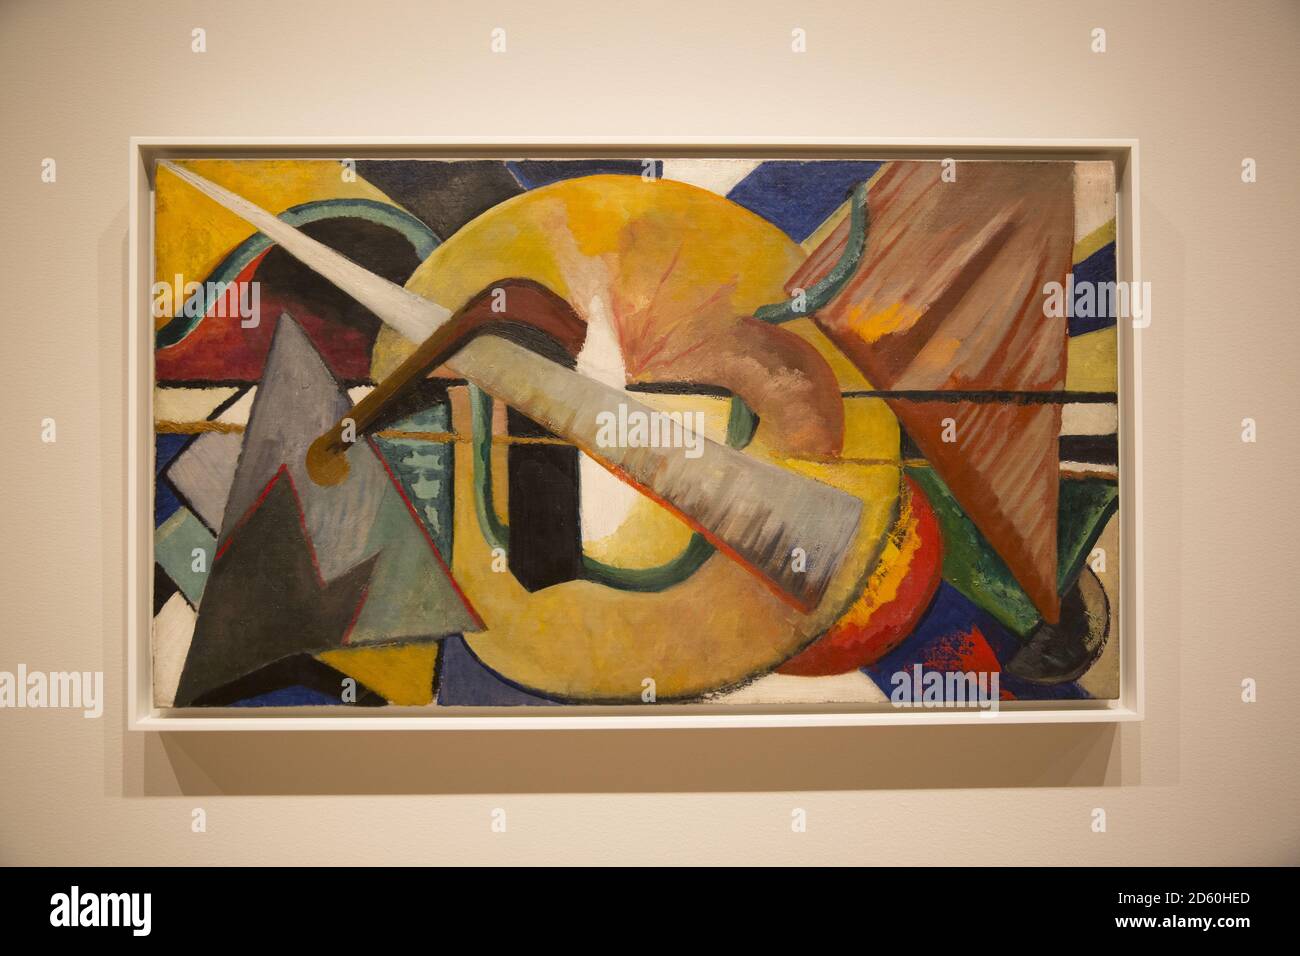 'Abstract Portrait of Marcel Duchamp' 1918 by Katherine S. Dreier, American;  Museum of Modern Art, NYC. Dreier described her painting of Marcel Duchamp as a 'psychological portrait' that captures his character through color and form. Stock Photo